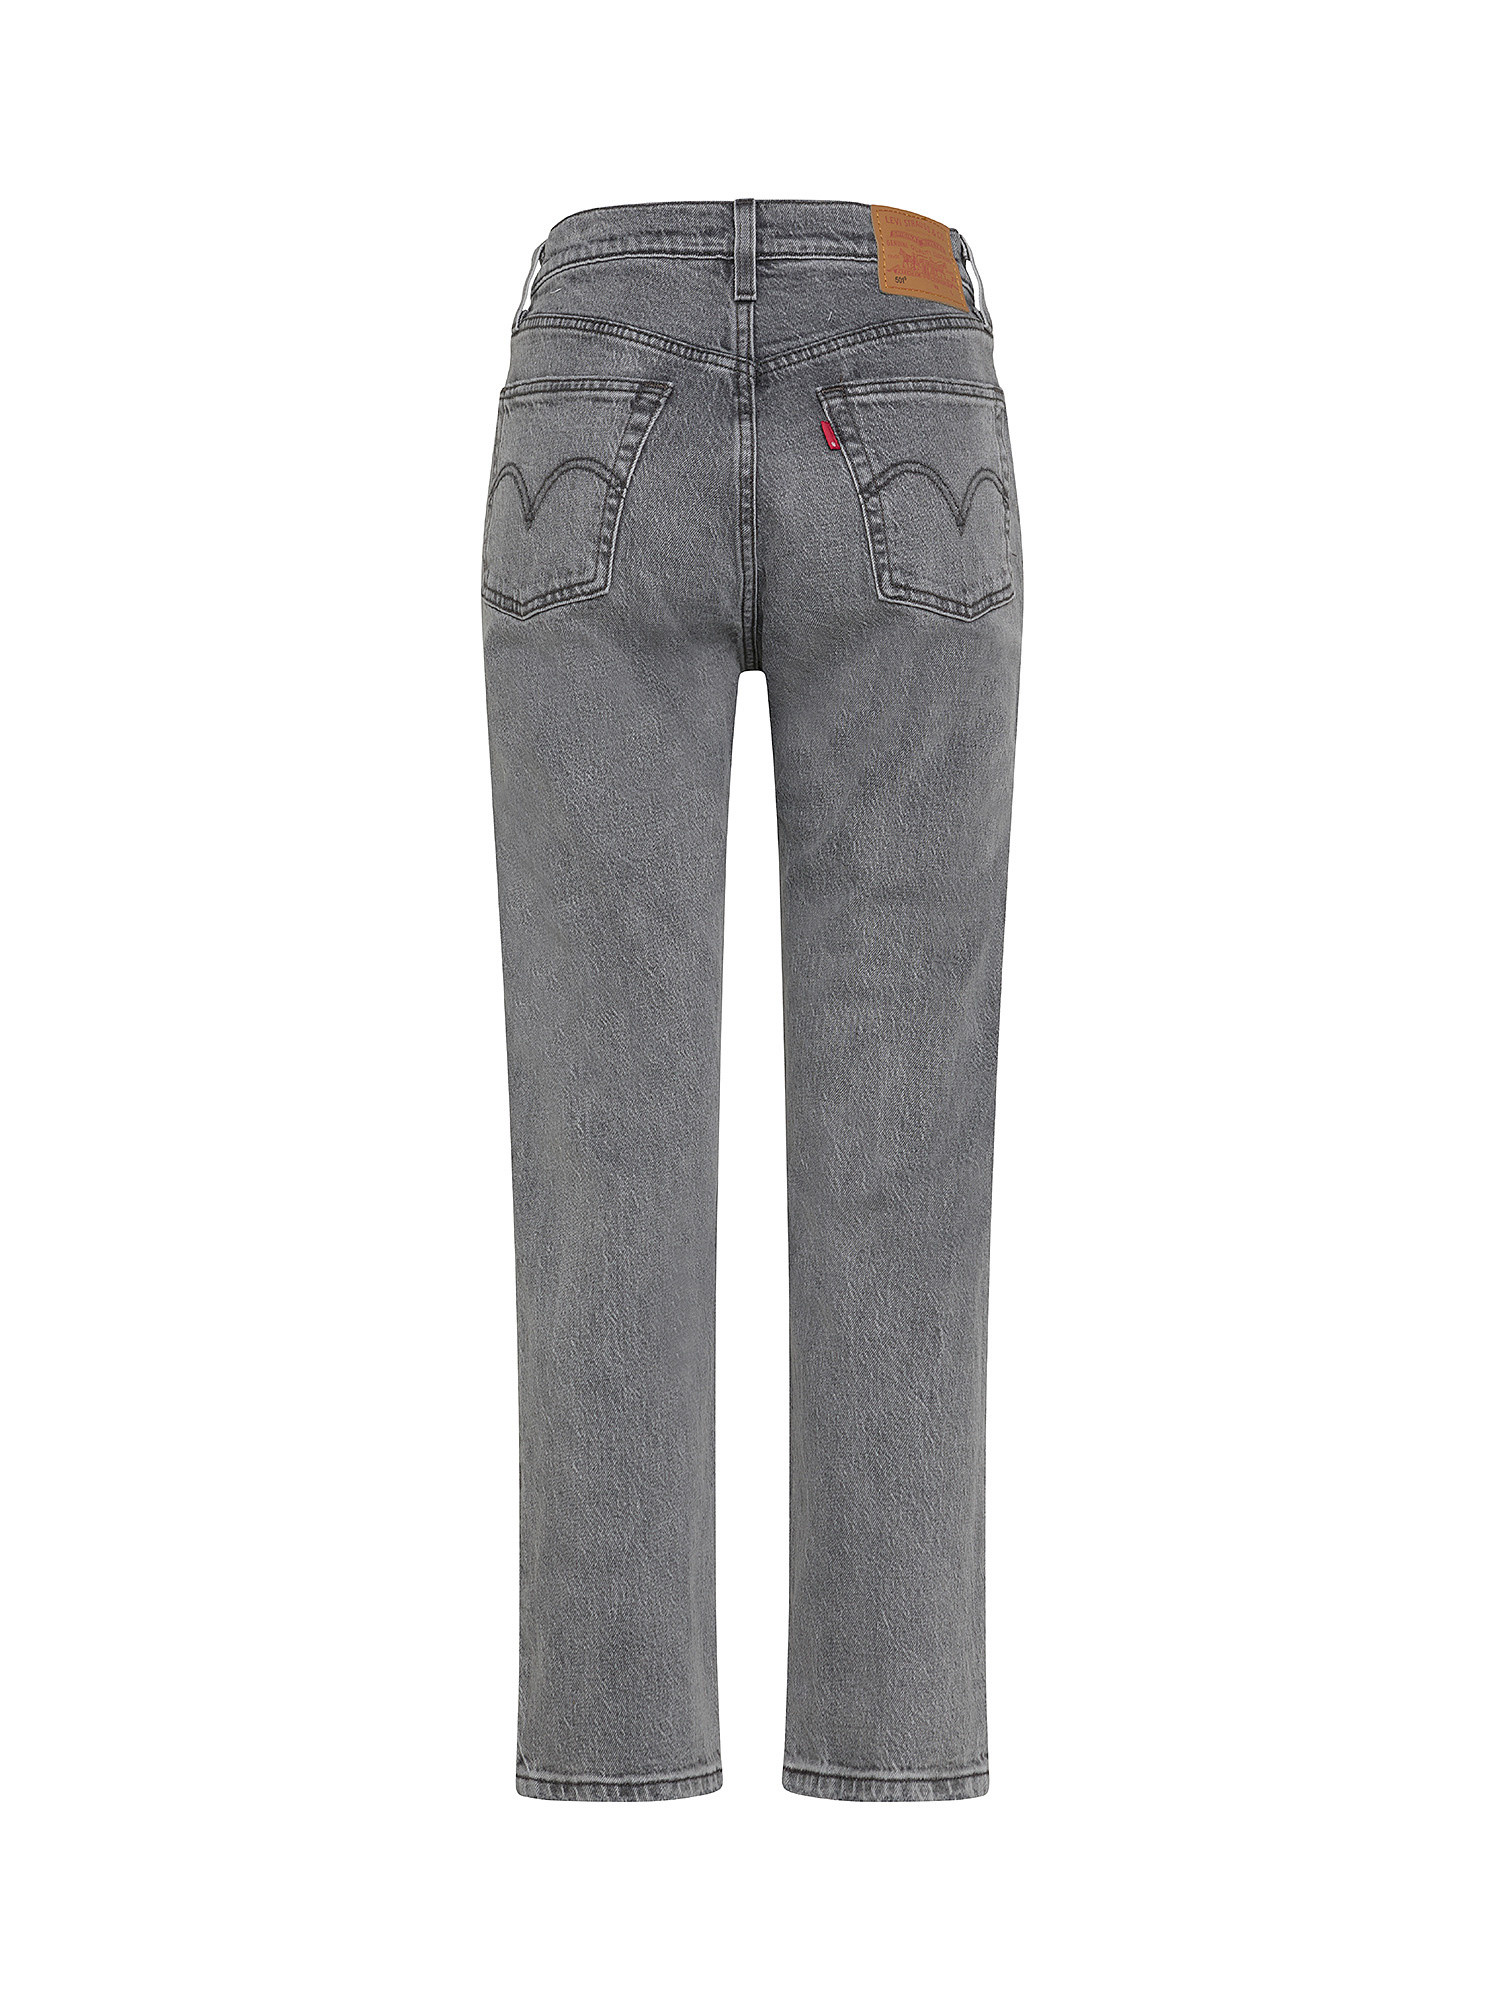 Levi's - jeans 501® cropped, Grigio, large image number 1